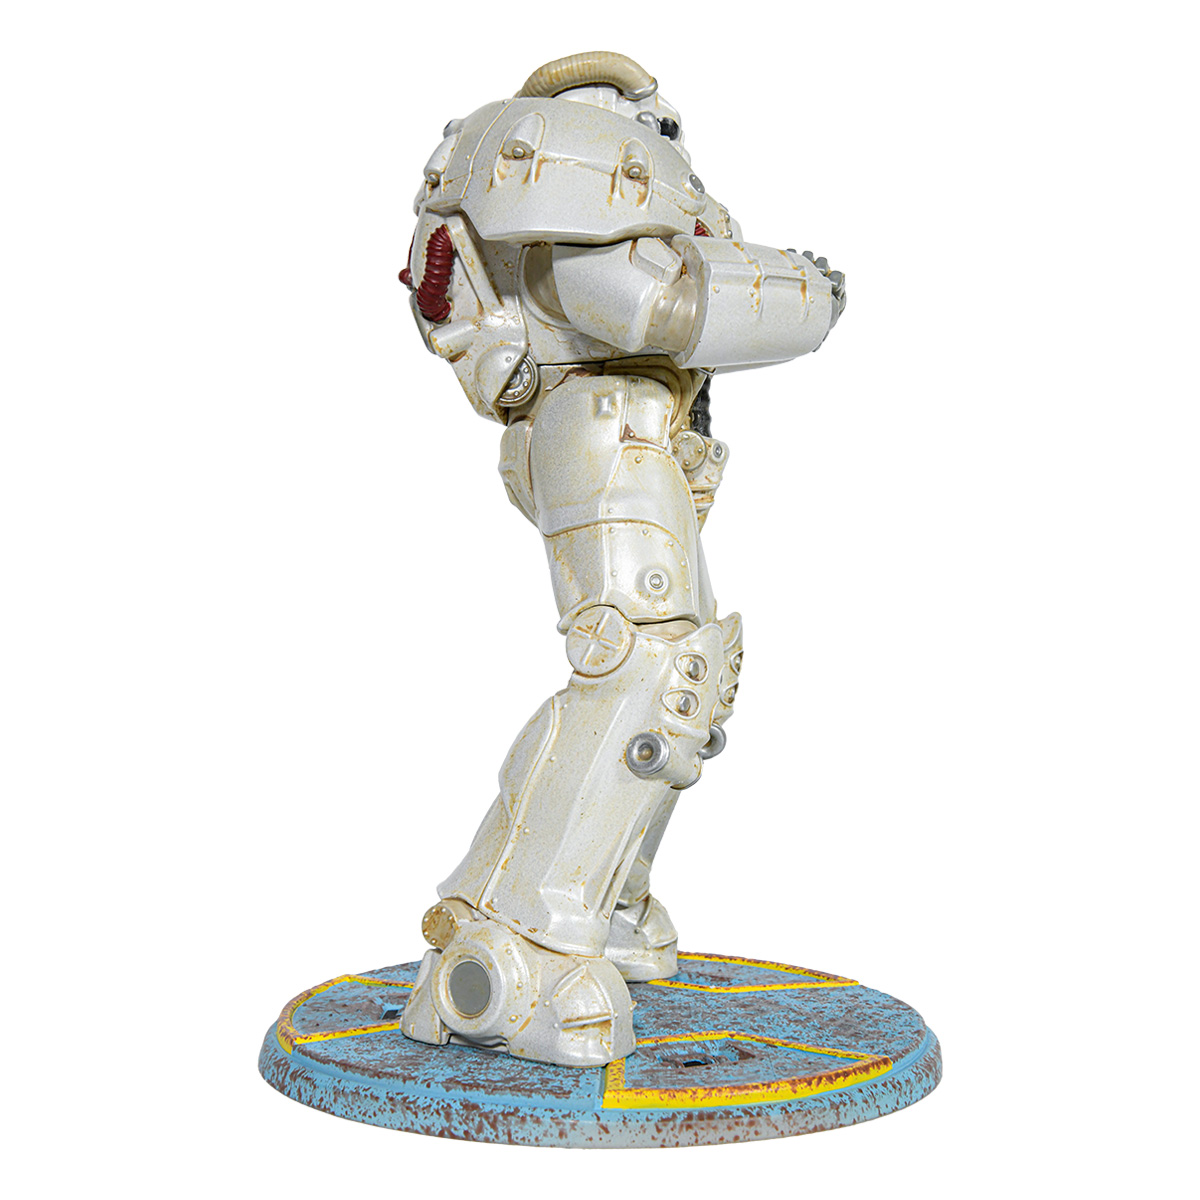 Fallout Power Armor Statue "Institute" Image 4